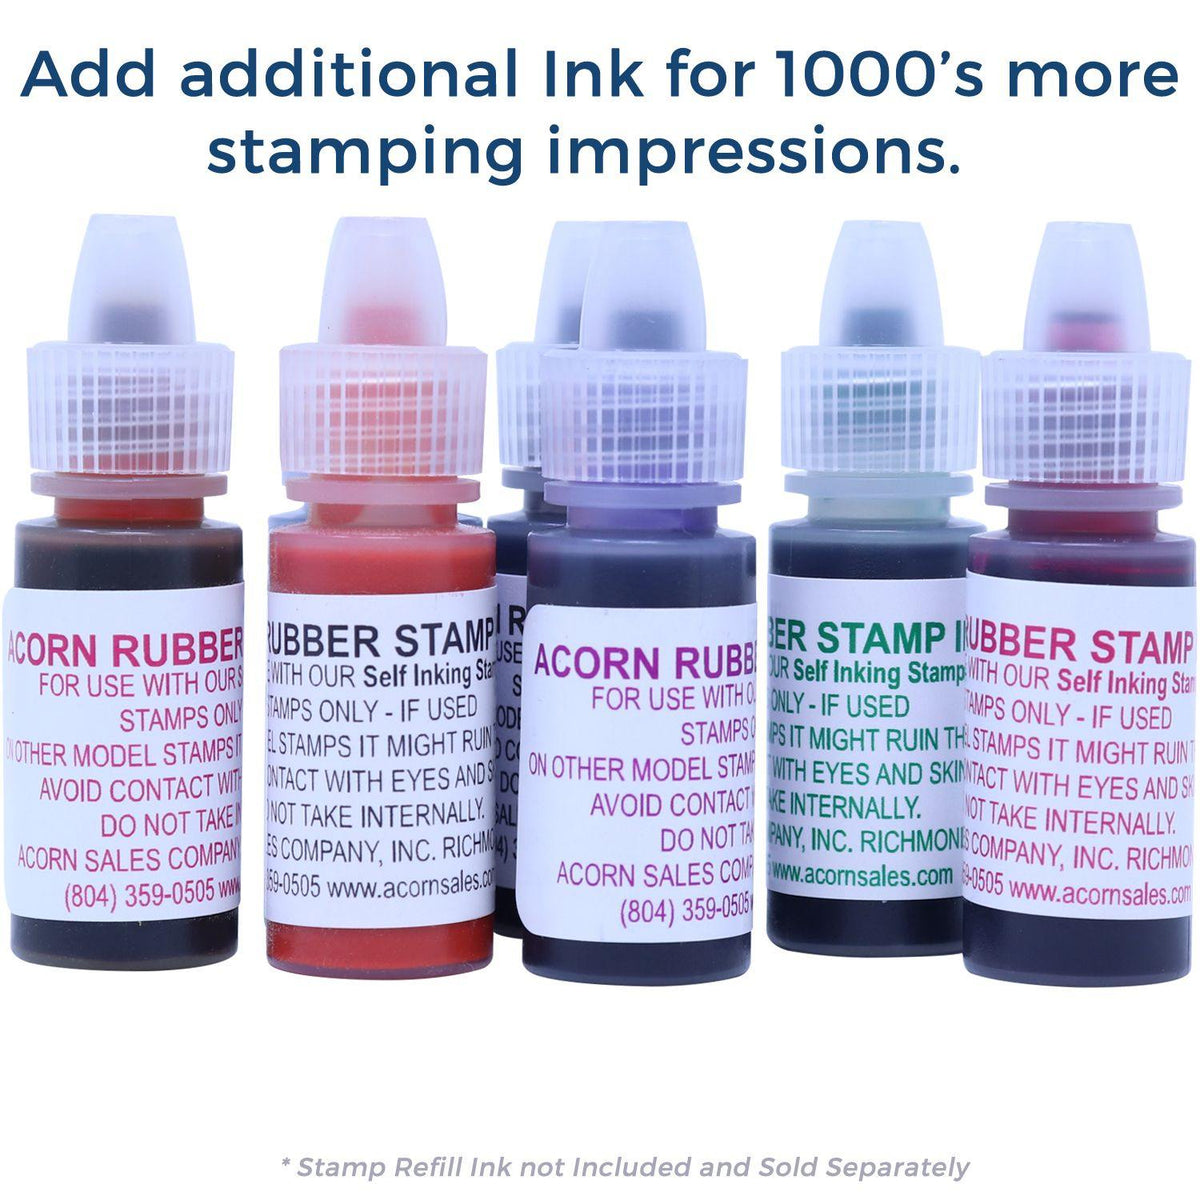 Slim Pre-Inked Bright Idea Stamp - Engineer Seal Stamps - Brand_Slim, Impression Size_Small, Stamp Type_Pre-Inked Stamp, Type of Use_Teacher